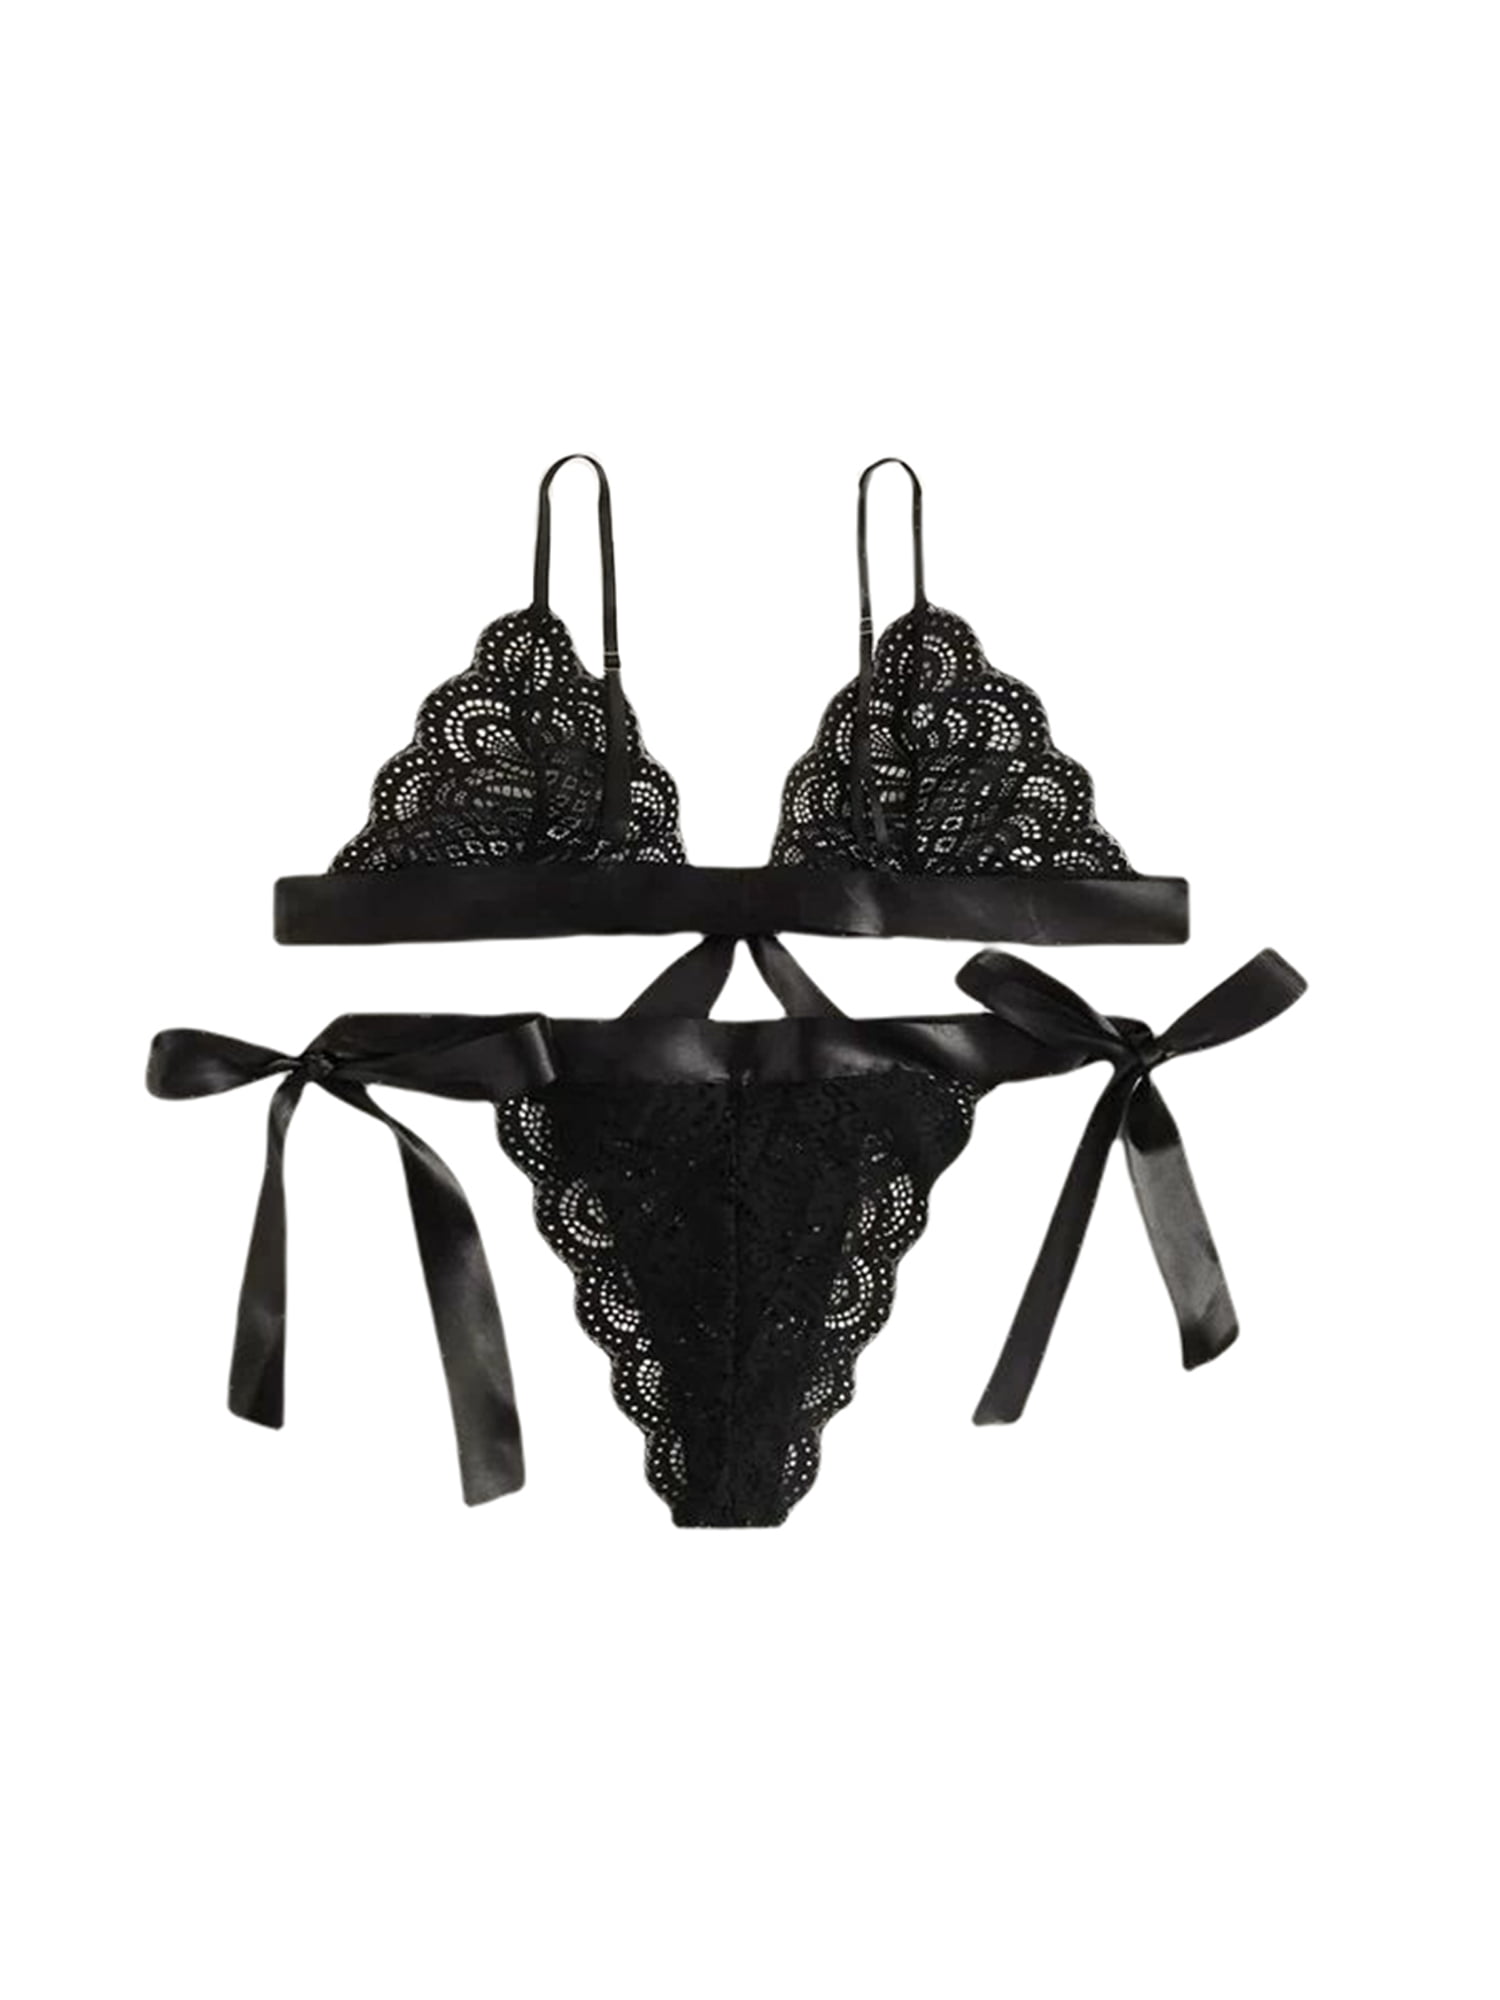 Tffr Women S Lingerie Set Sexy Lace Bra And Side Tie Panty Two Piece Suit For Wedding Nights